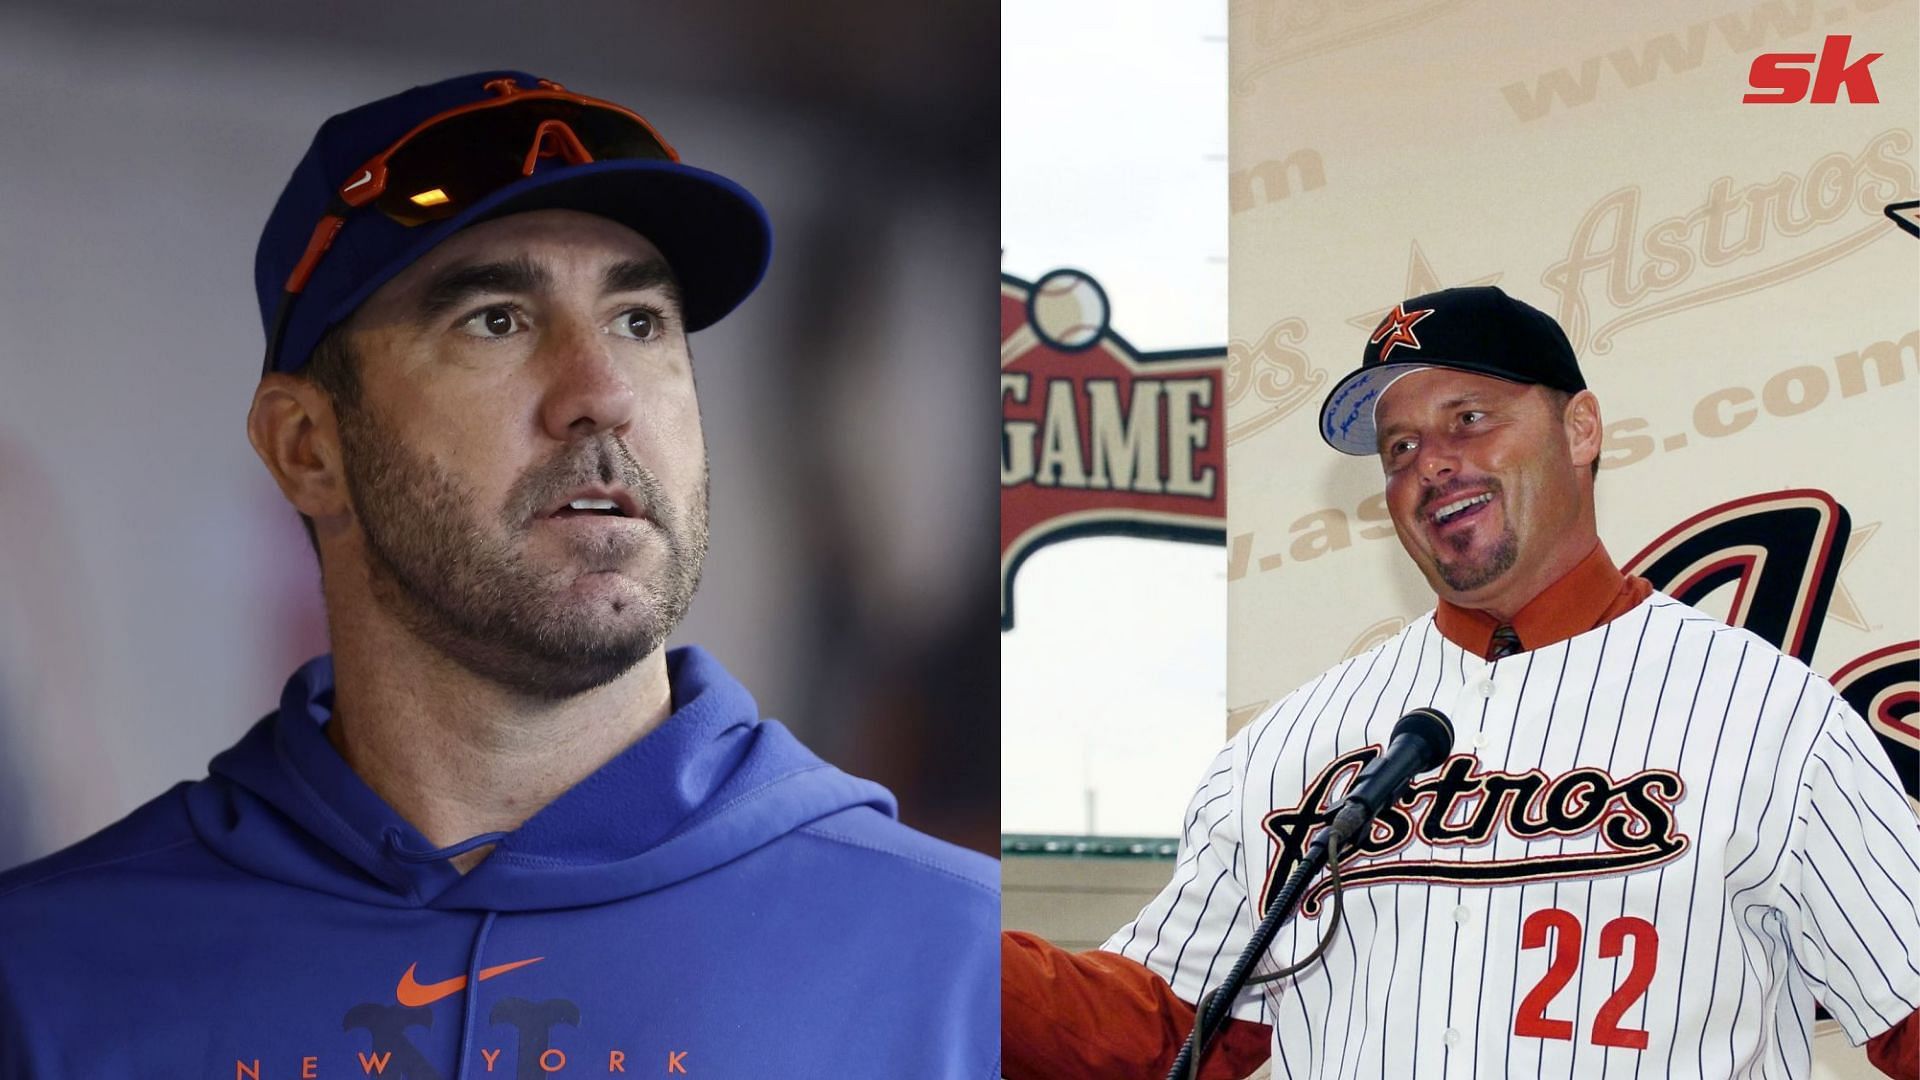 When Roger Clemens discussed former Astros star Justin Verlander's reaction  to backlash following 2017 sign-stealing scheme